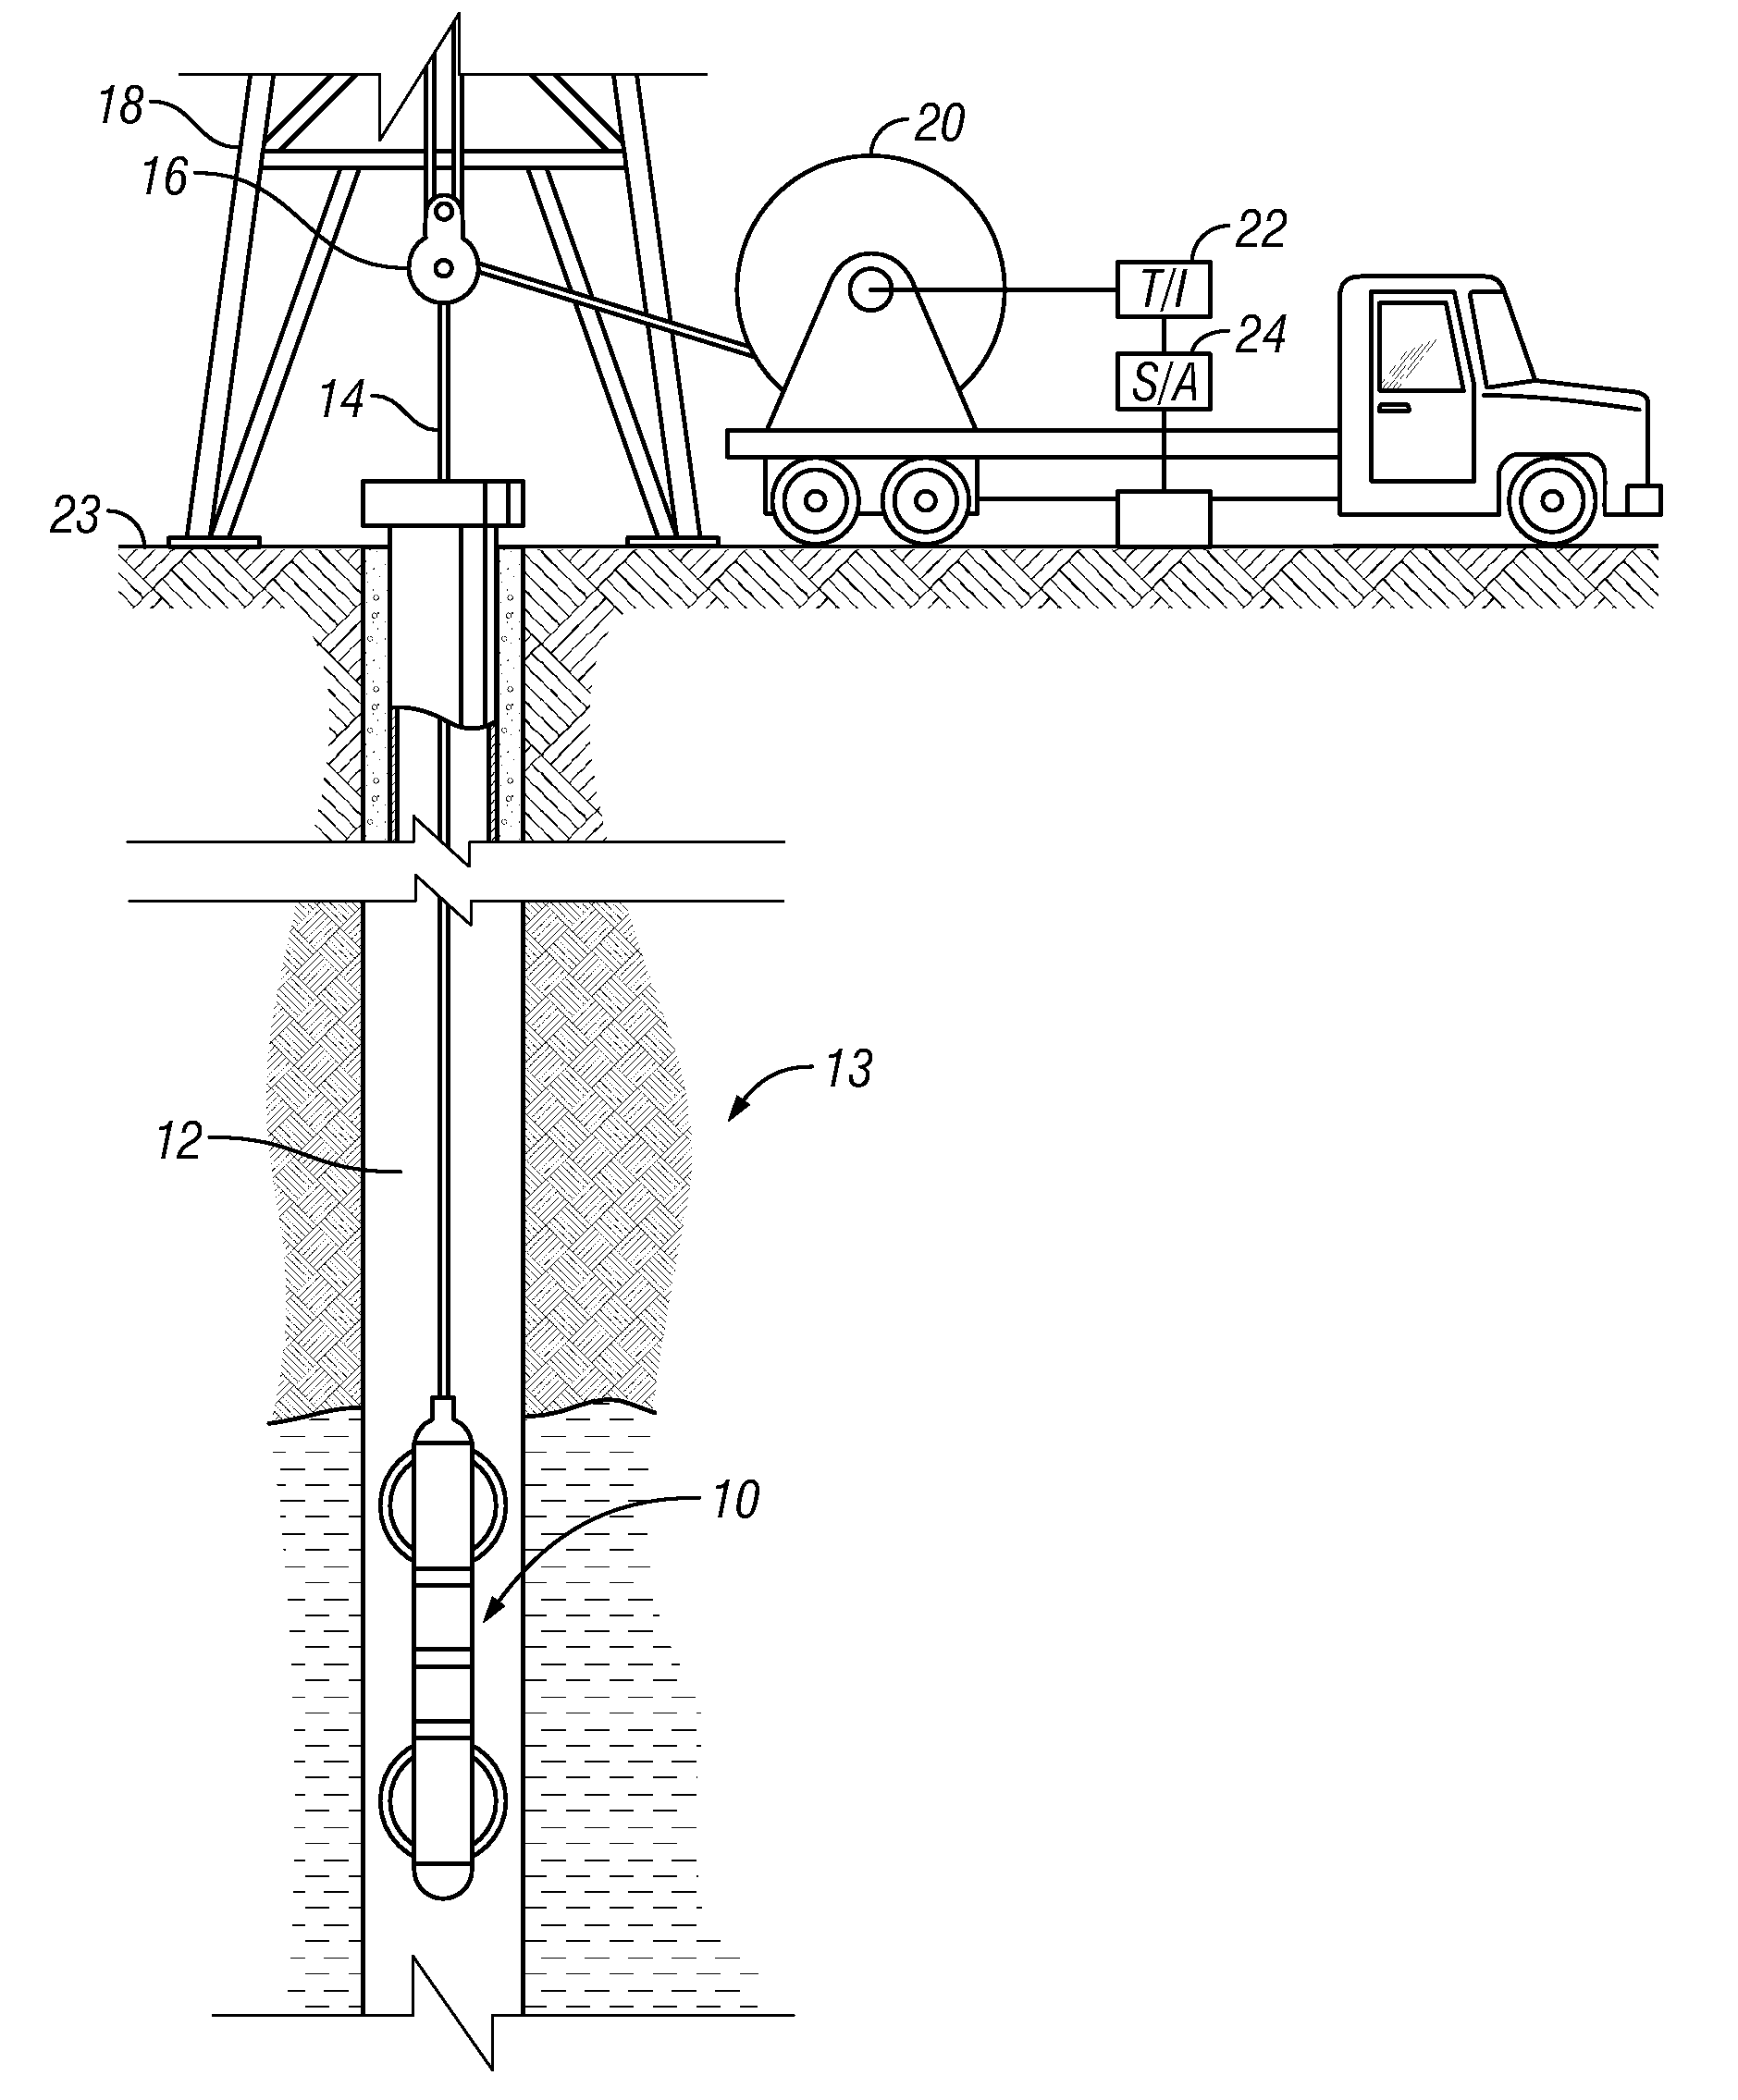 System for measuring stress in downhole tubulars